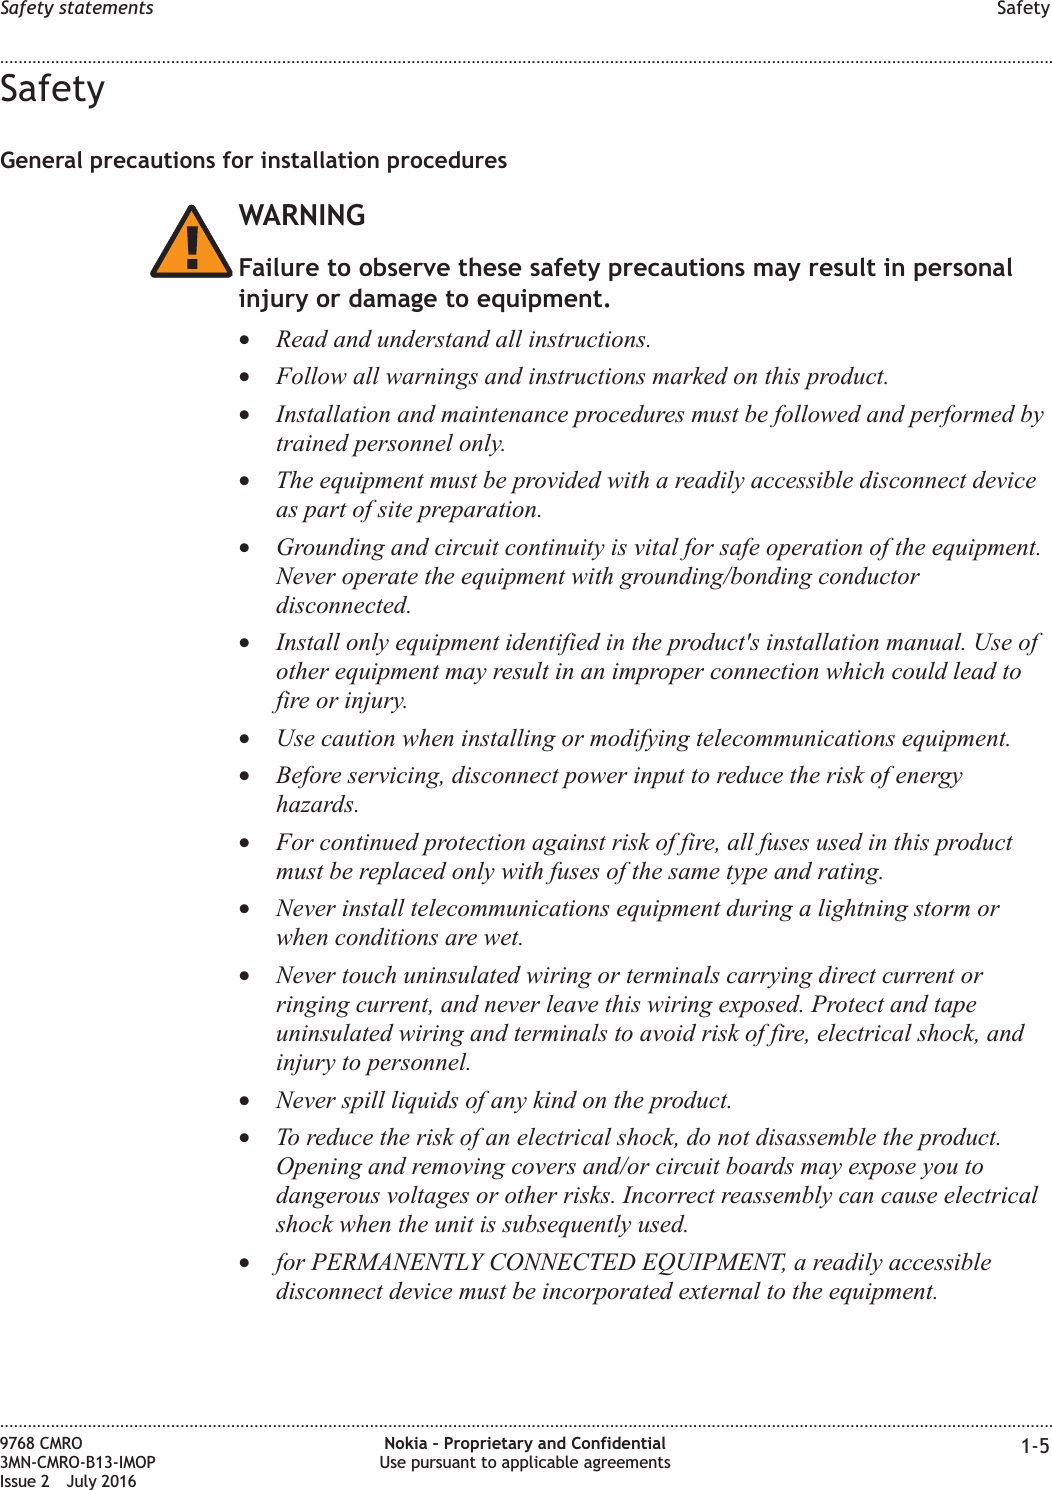 SafetyGeneral precautions for installation proceduresWARNINGFailure to observe these safety precautions may result in personalinjury or damage to equipment.•Read and understand all instructions.•Follow all warnings and instructions marked on this product.•Installation and maintenance procedures must be followed and performed bytrained personnel only.•The equipment must be provided with a readily accessible disconnect deviceas part of site preparation.•Grounding and circuit continuity is vital for safe operation of the equipment.Never operate the equipment with grounding/bonding conductordisconnected.•Install only equipment identified in the product&apos;s installation manual. Use ofother equipment may result in an improper connection which could lead tofire or injury.•Use caution when installing or modifying telecommunications equipment.•Before servicing, disconnect power input to reduce the risk of energyhazards.•For continued protection against risk of fire, all fuses used in this productmust be replaced only with fuses of the same type and rating.•Never install telecommunications equipment during a lightning storm orwhen conditions are wet.•Never touch uninsulated wiring or terminals carrying direct current orringing current, and never leave this wiring exposed. Protect and tapeuninsulated wiring and terminals to avoid risk of fire, electrical shock, andinjury to personnel.•Never spill liquids of any kind on the product.•To reduce the risk of an electrical shock, do not disassemble the product.Opening and removing covers and/or circuit boards may expose you todangerous voltages or other risks. Incorrect reassembly can cause electricalshock when the unit is subsequently used.•for PERMANENTLY CONNECTED EQUIPMENT, a readily accessibledisconnect device must be incorporated external to the equipment.Safety statements Safety........................................................................................................................................................................................................................................................................................................................................................................................................................................................................9768 CMRO3MN-CMRO-B13-IMOPIssue 2 July 2016Nokia – Proprietary and ConfidentialUse pursuant to applicable agreements 1-5FCC FILING FCC FILING